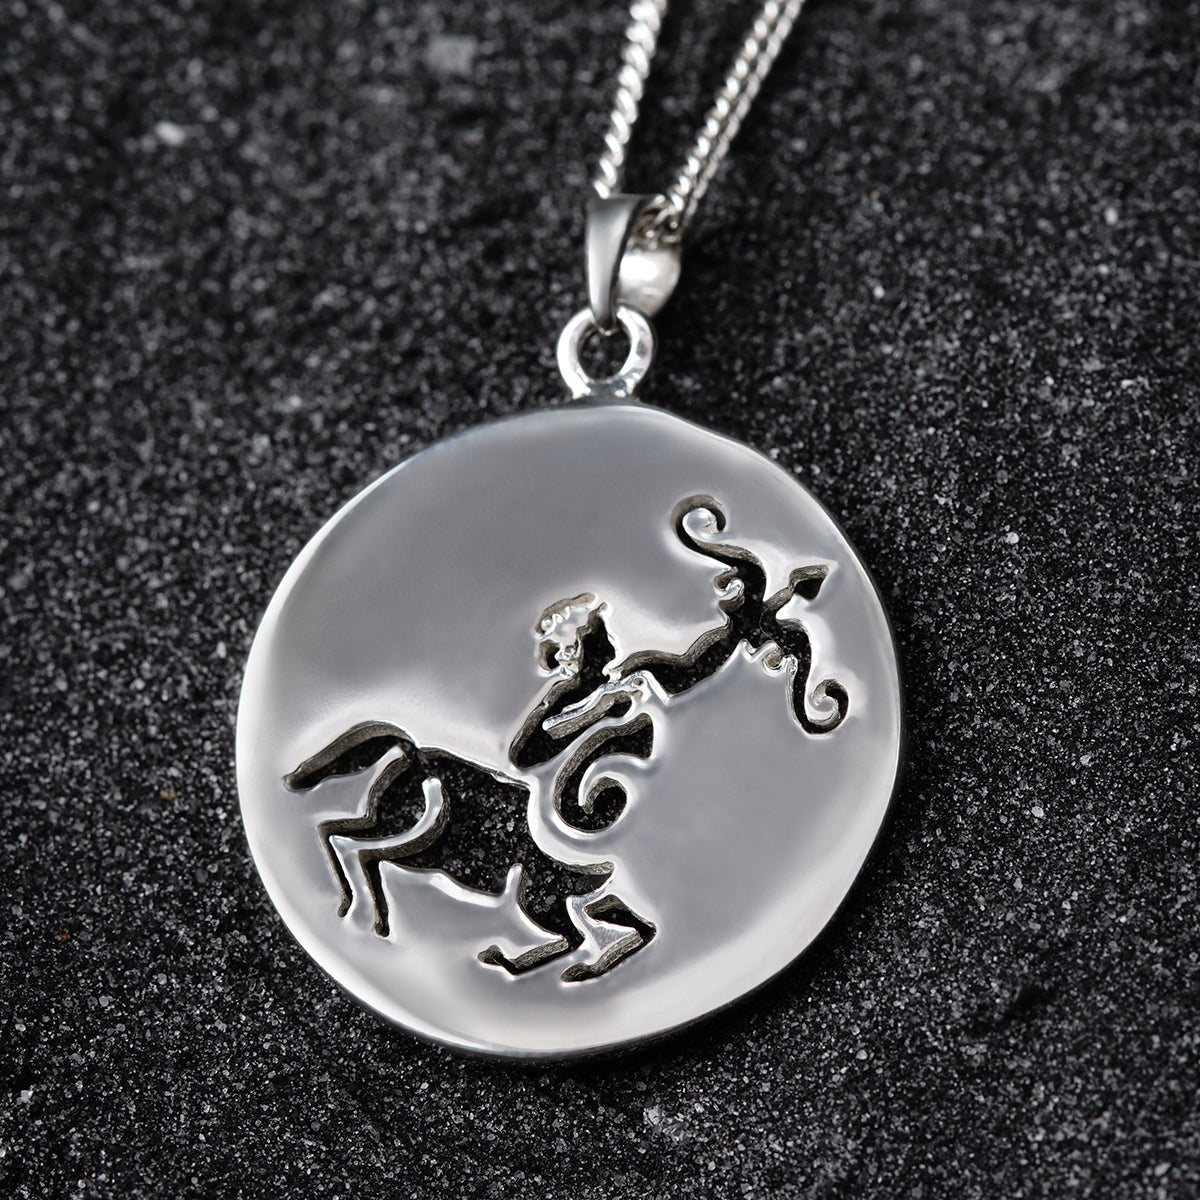 a silver pendant with a horse on it